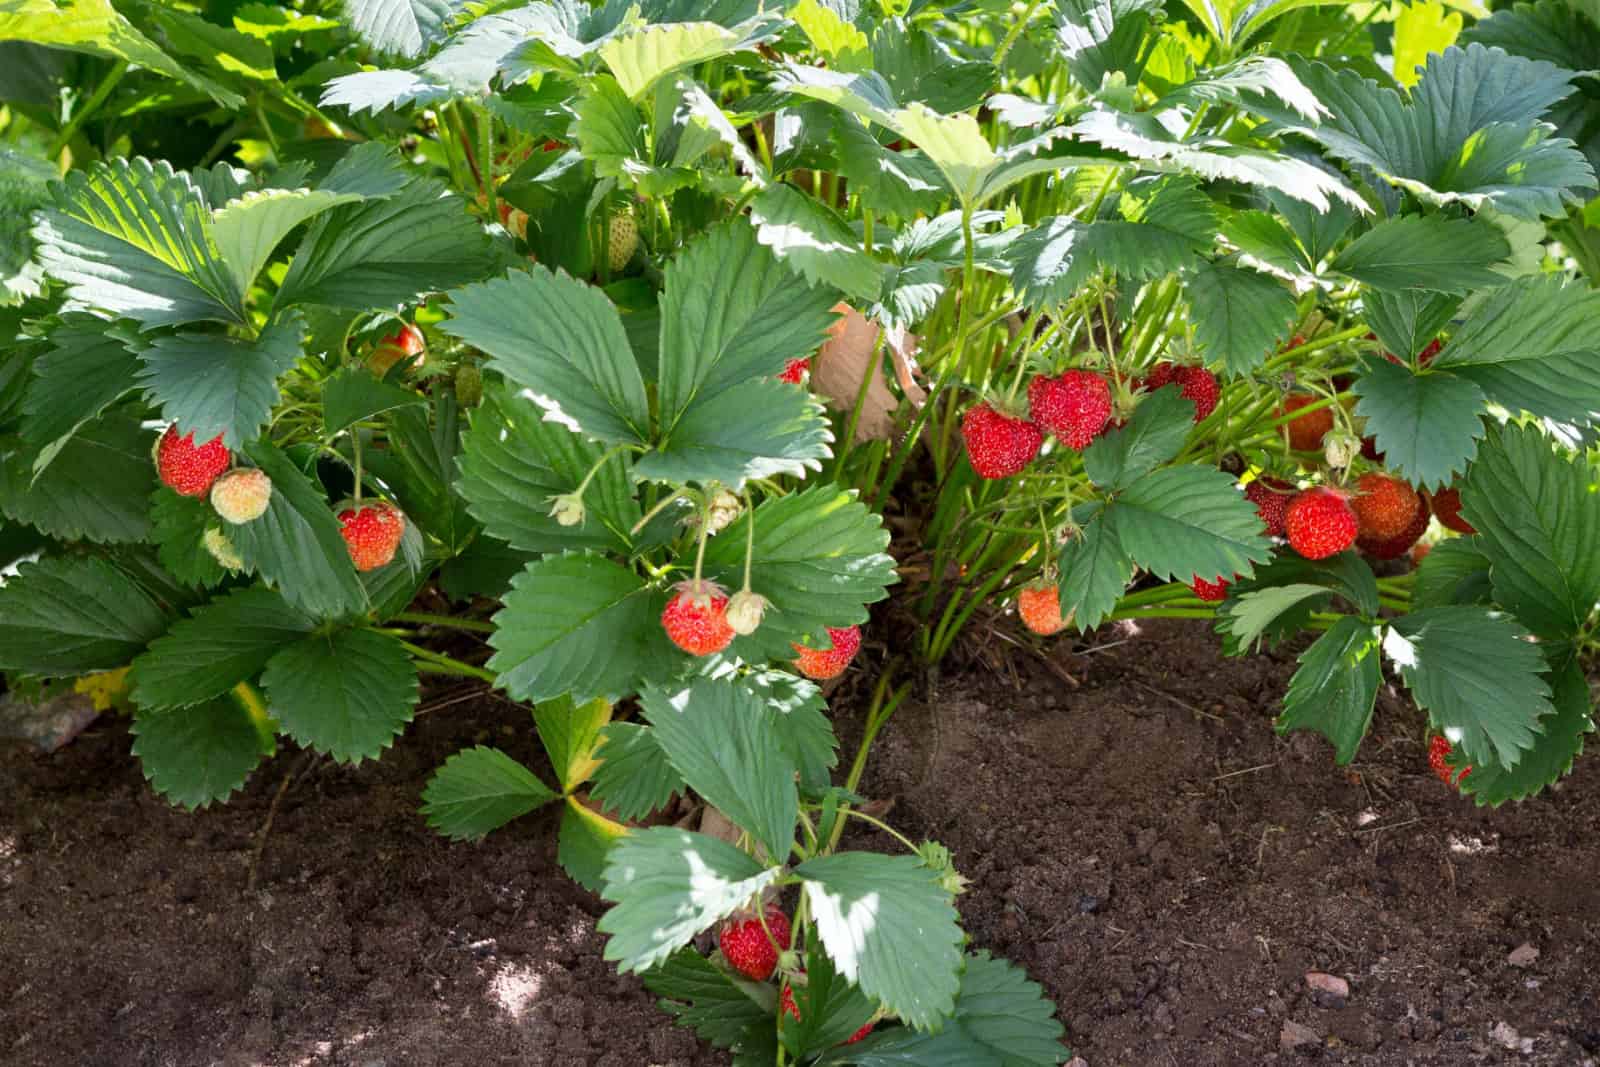 Strawberry plant growing fruits